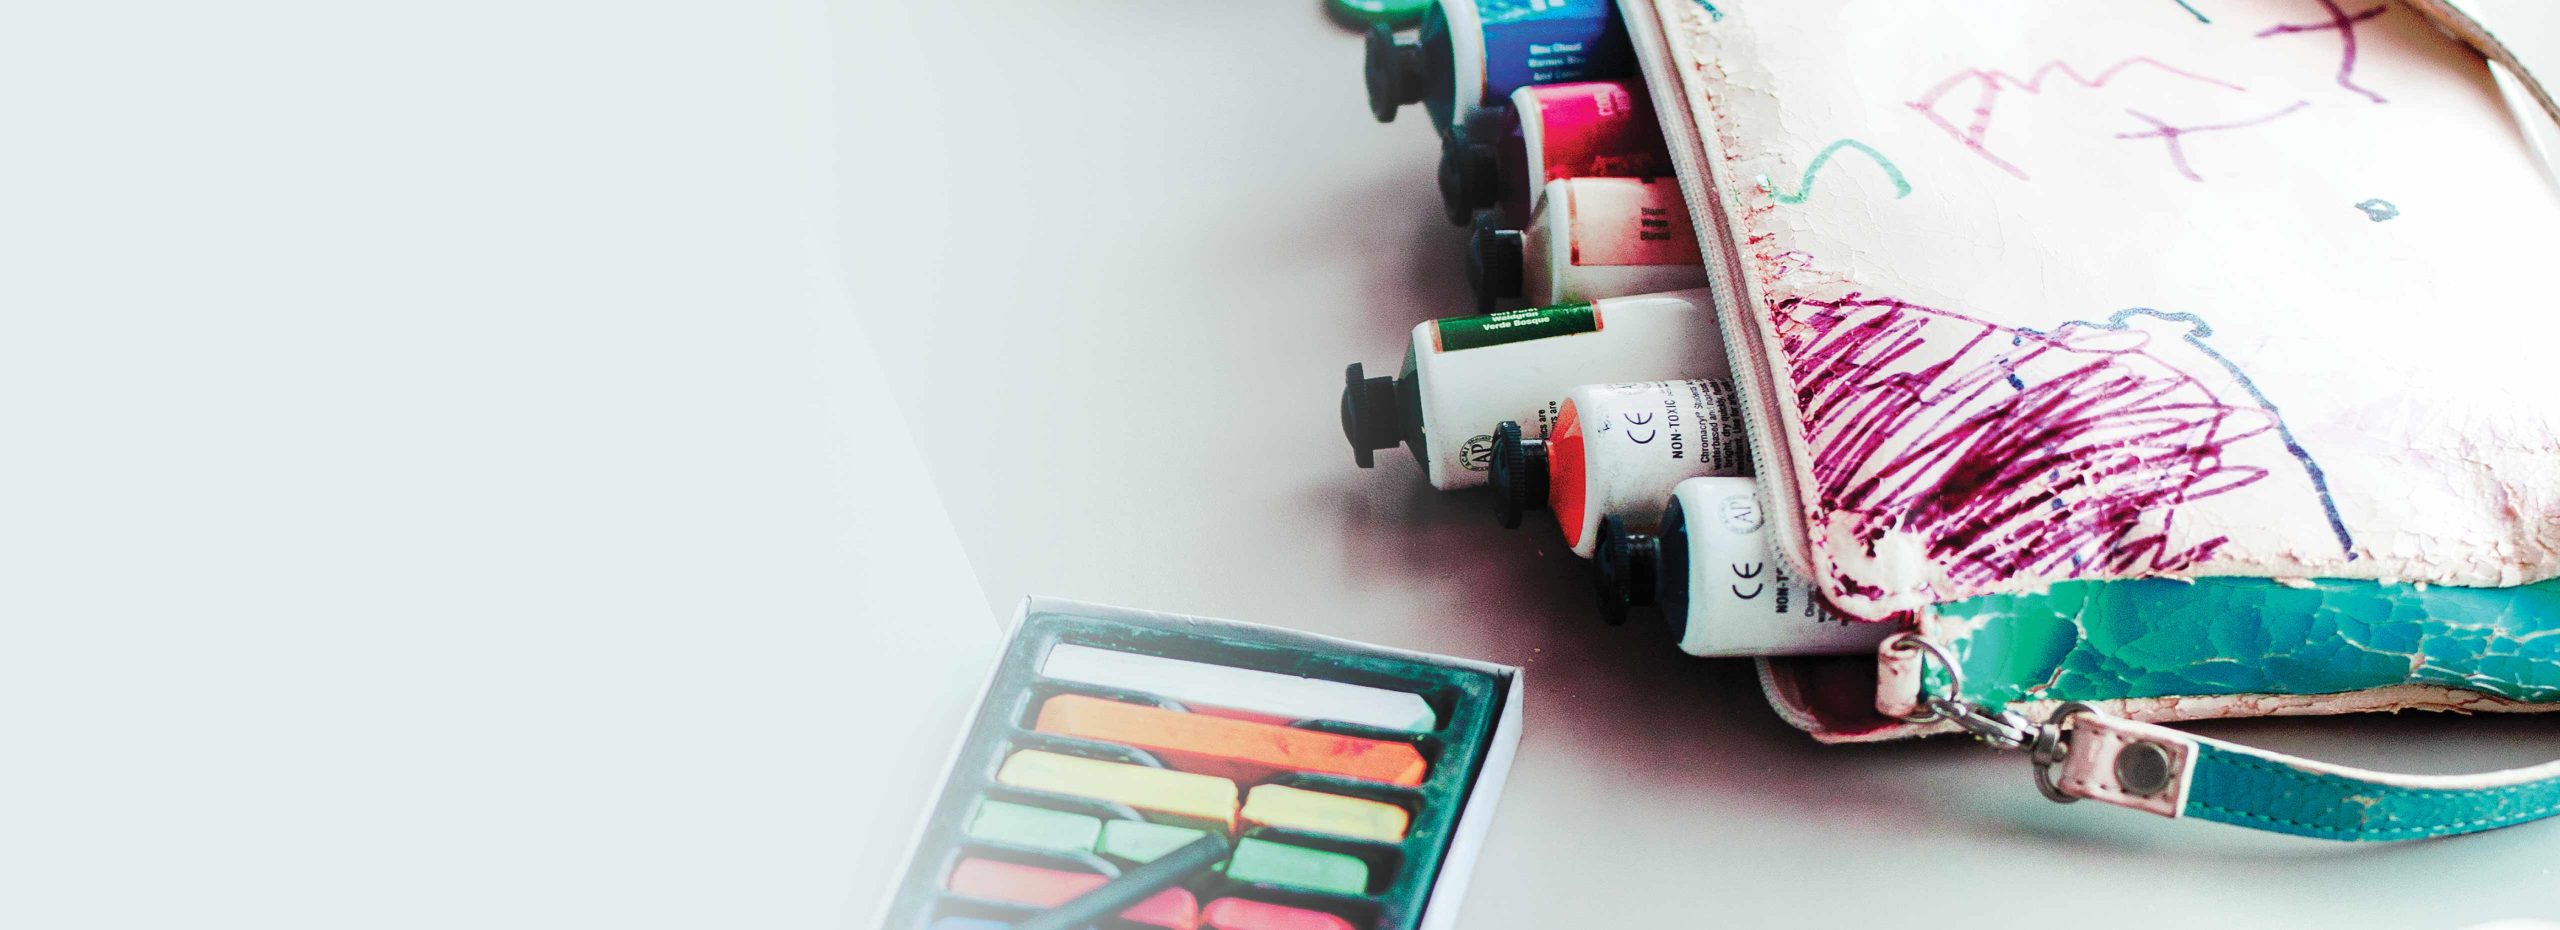 Pastels and acrylic paint tubes